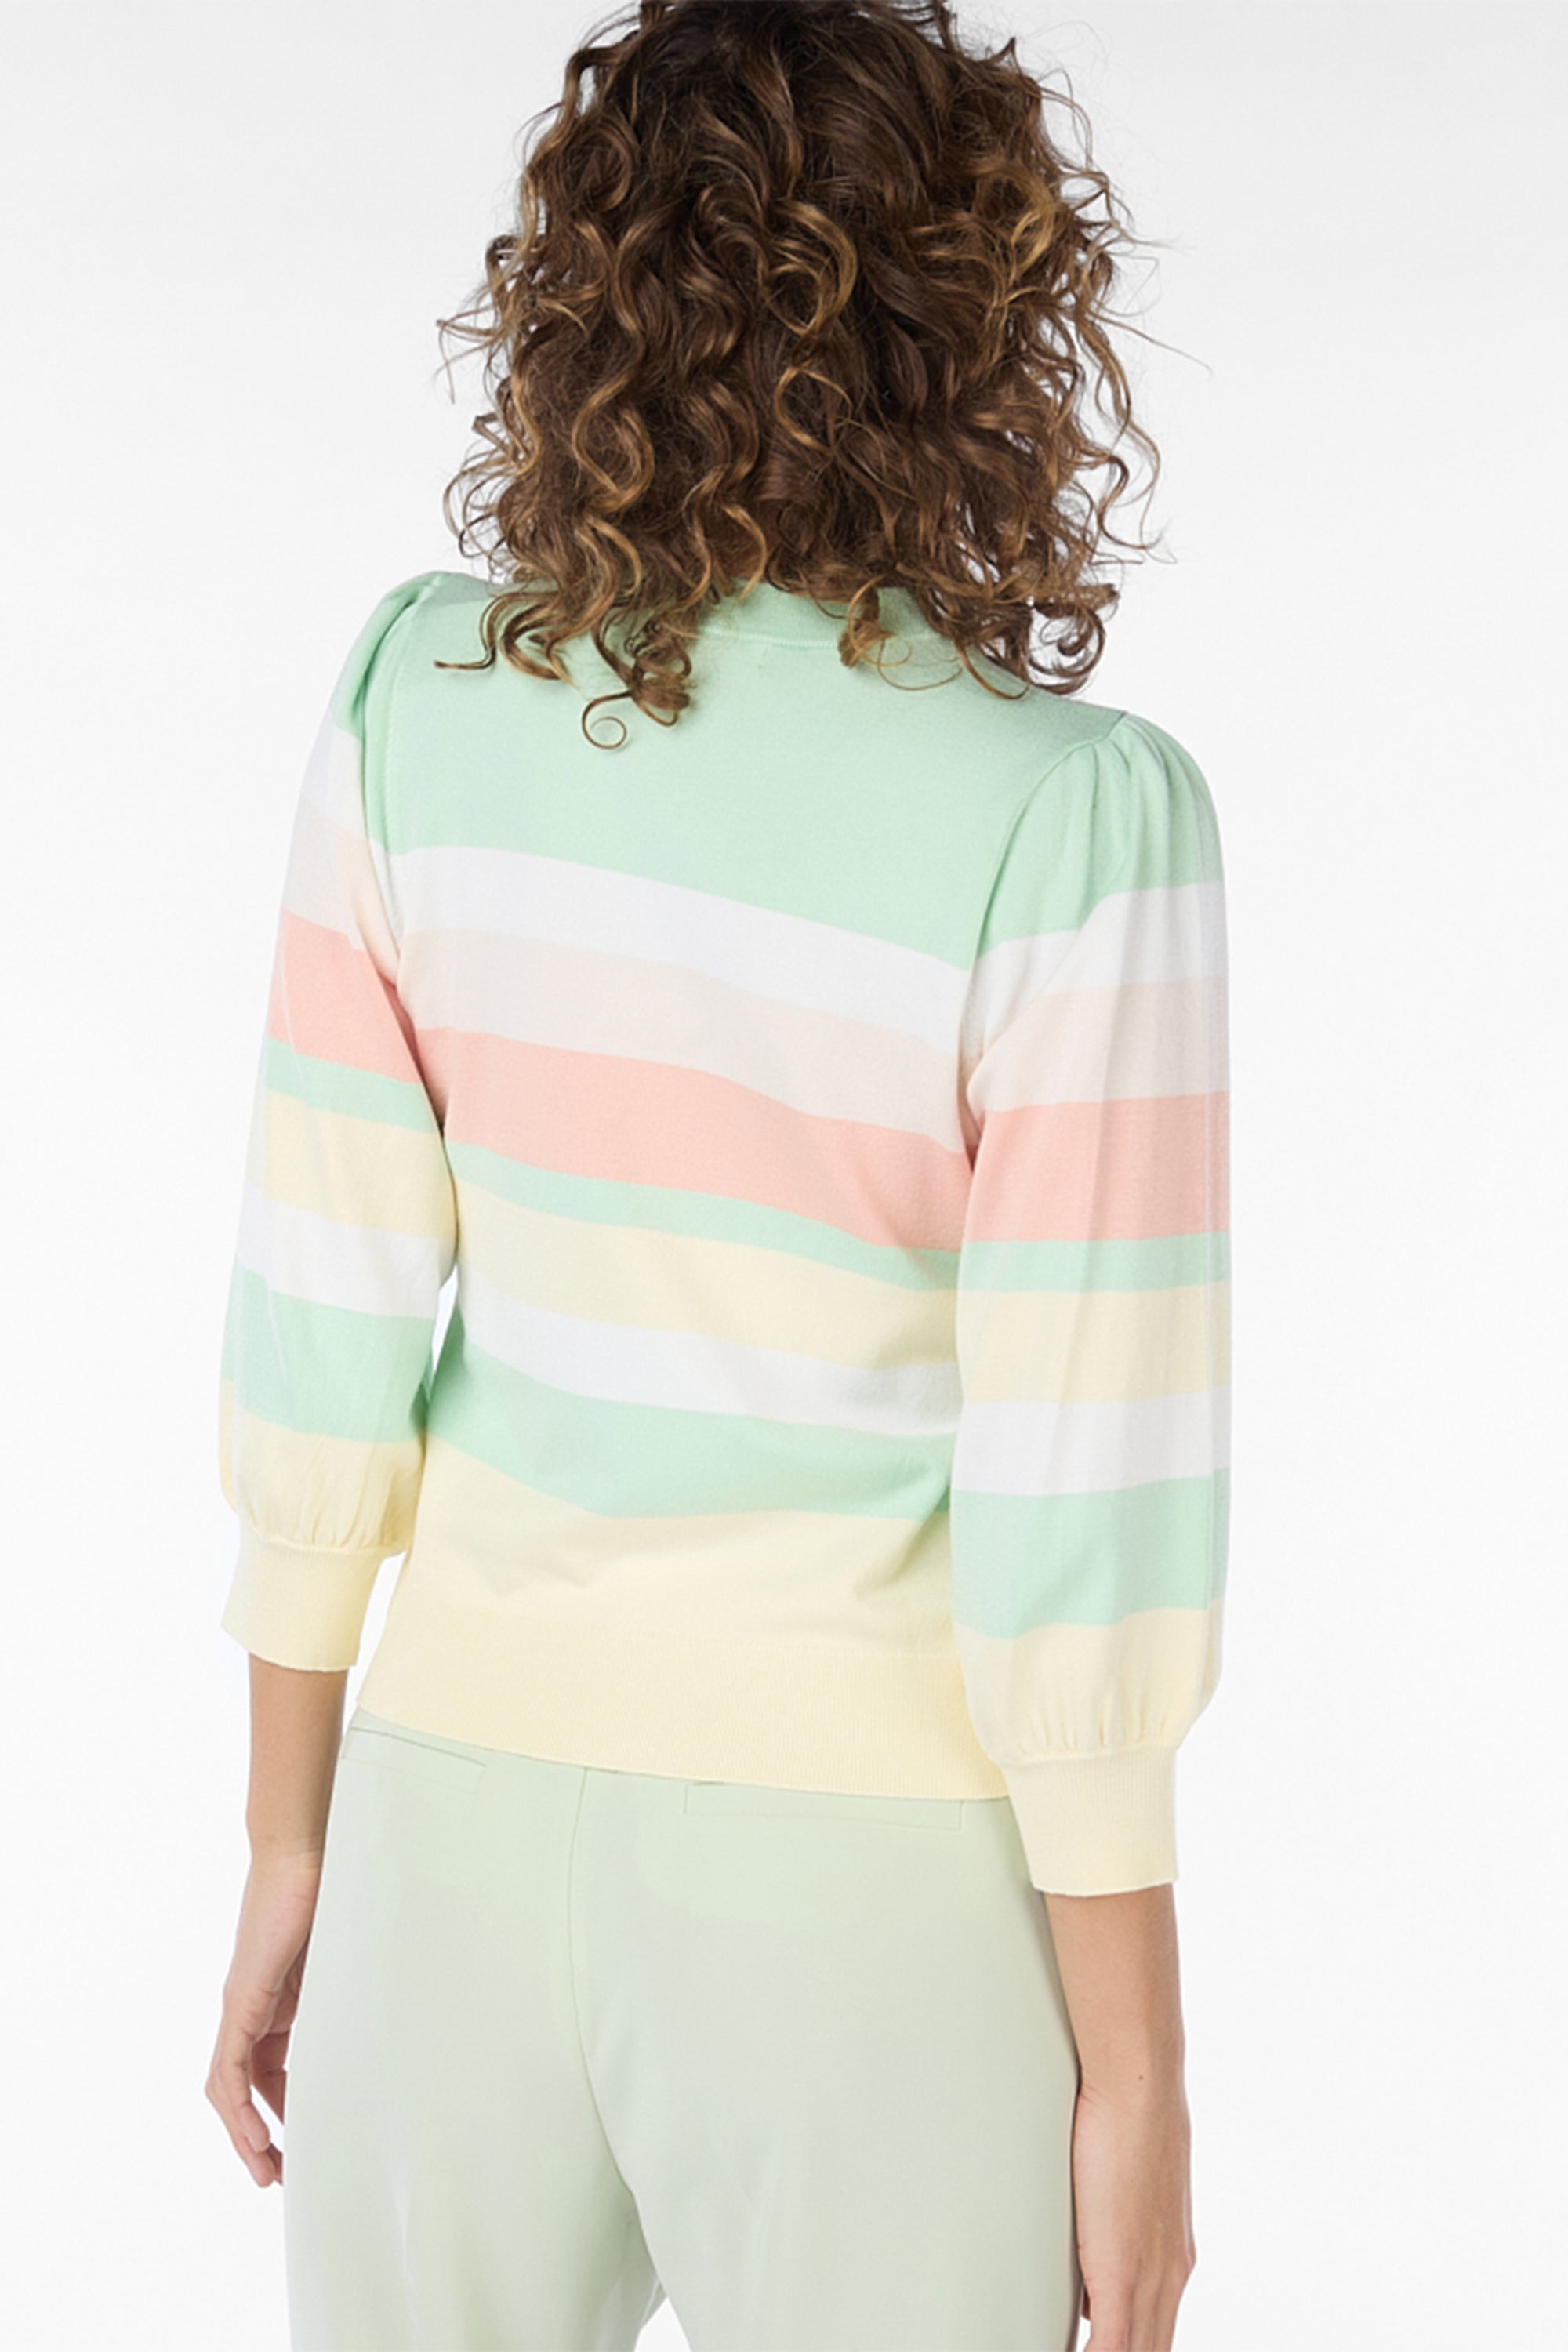 Back view of Esqualo (SP2407024) Women's 3/4 Sleeve Pastel Striped Sweater in pastel green, yellow & pink